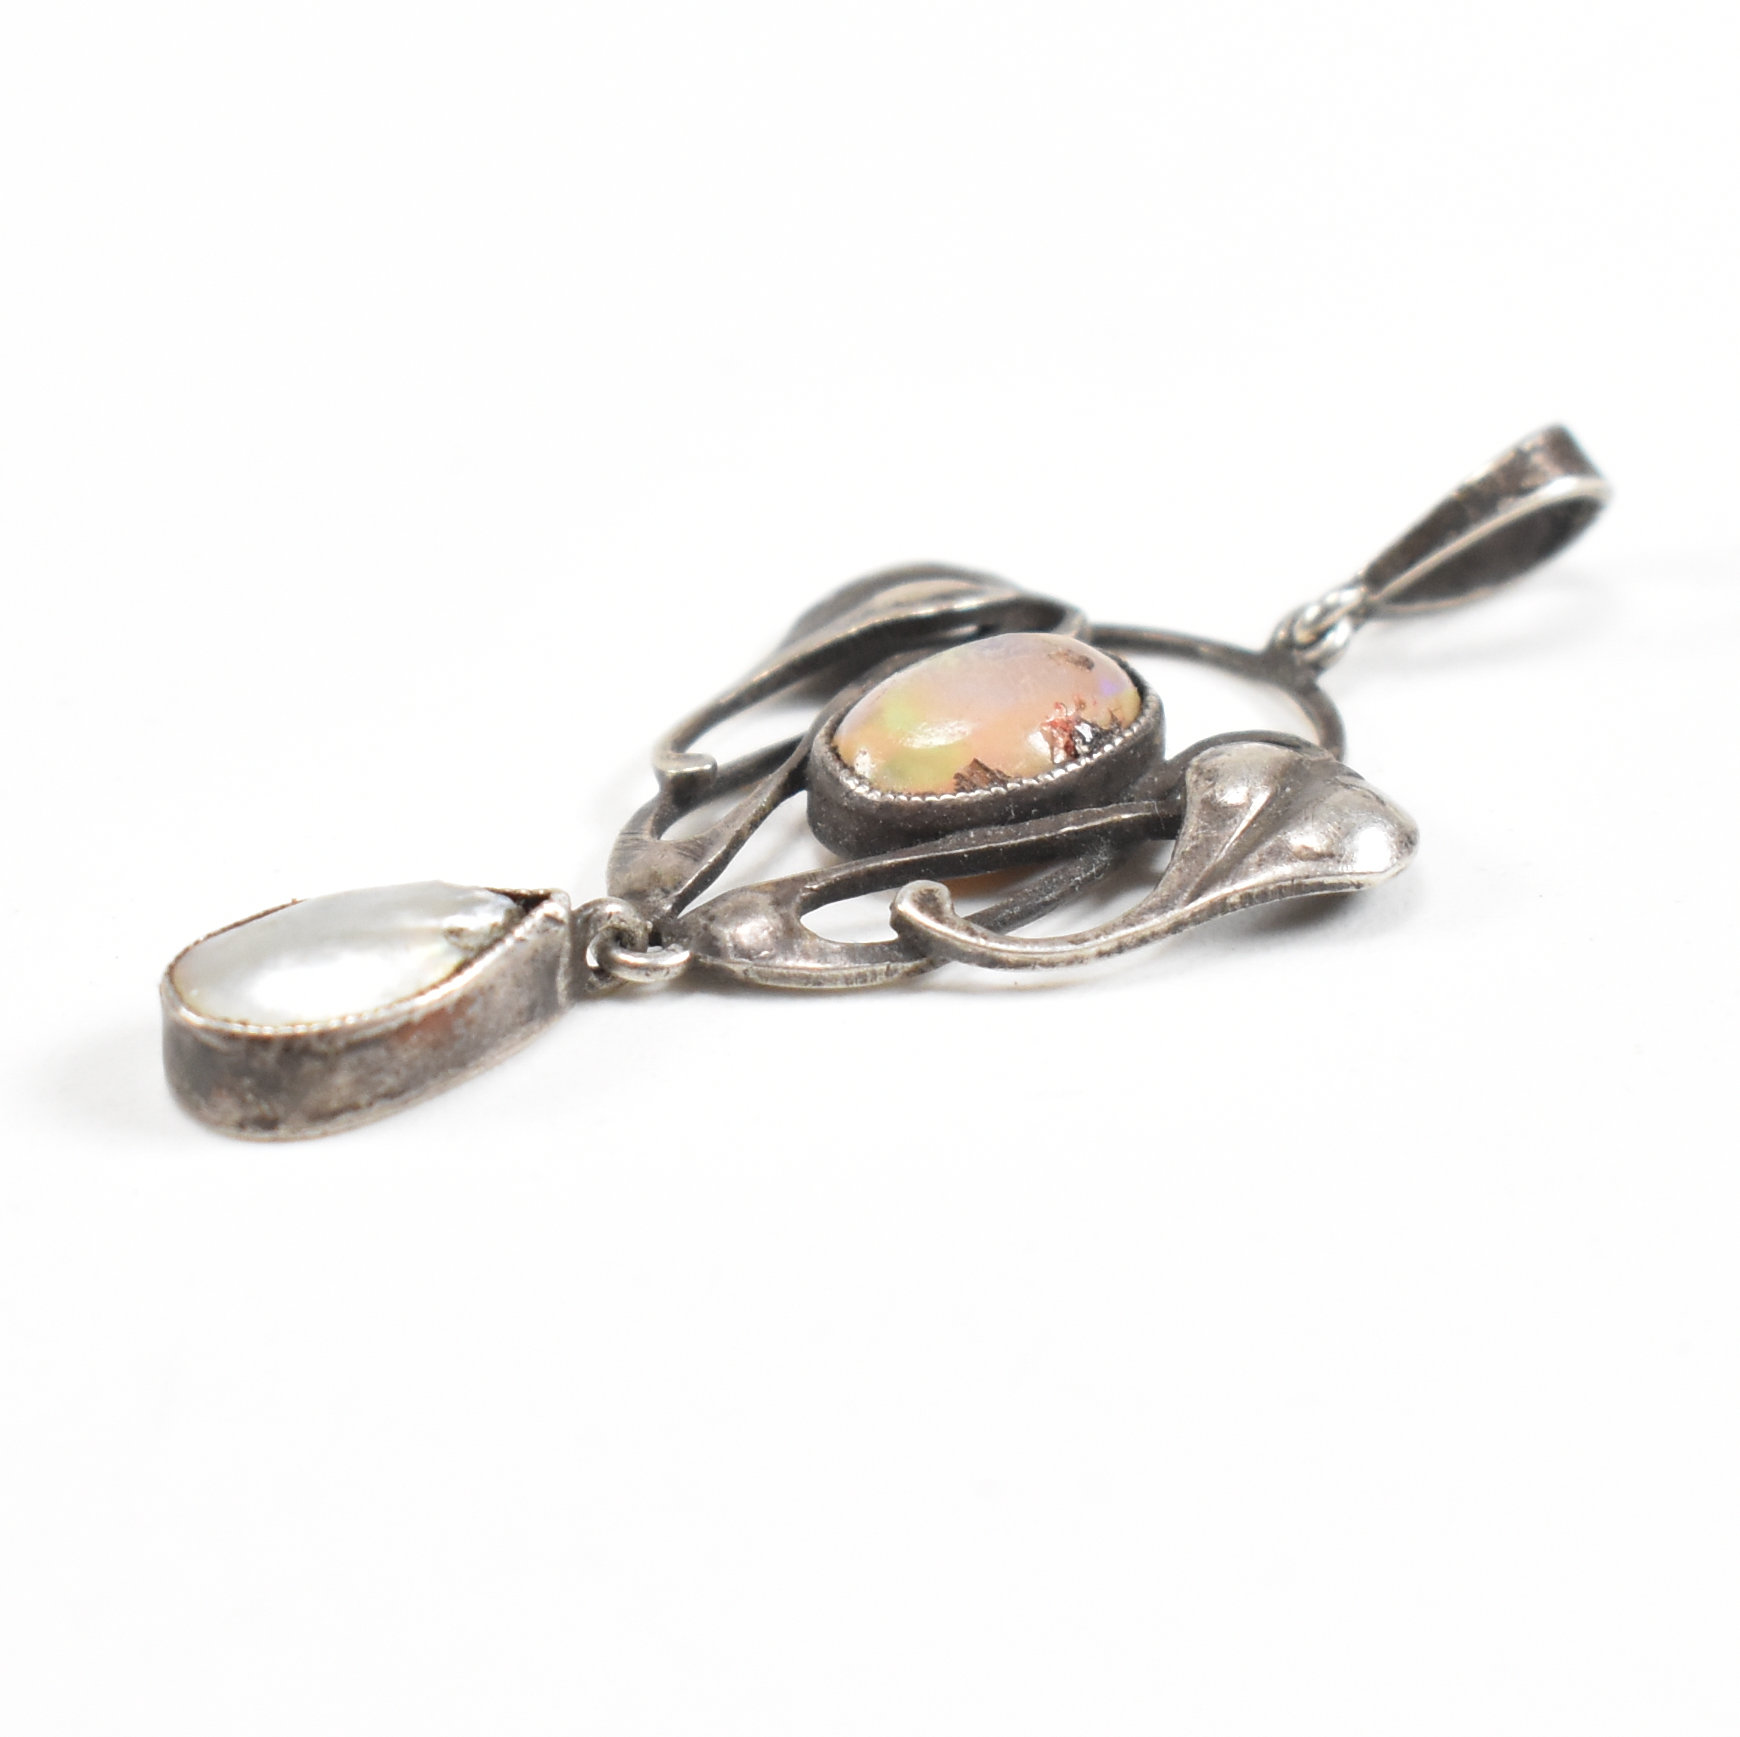 ARTS & CRAFTS SILVER OPAL & MOTHER OF PEARL NECKLACE PENDANT - Image 6 of 6